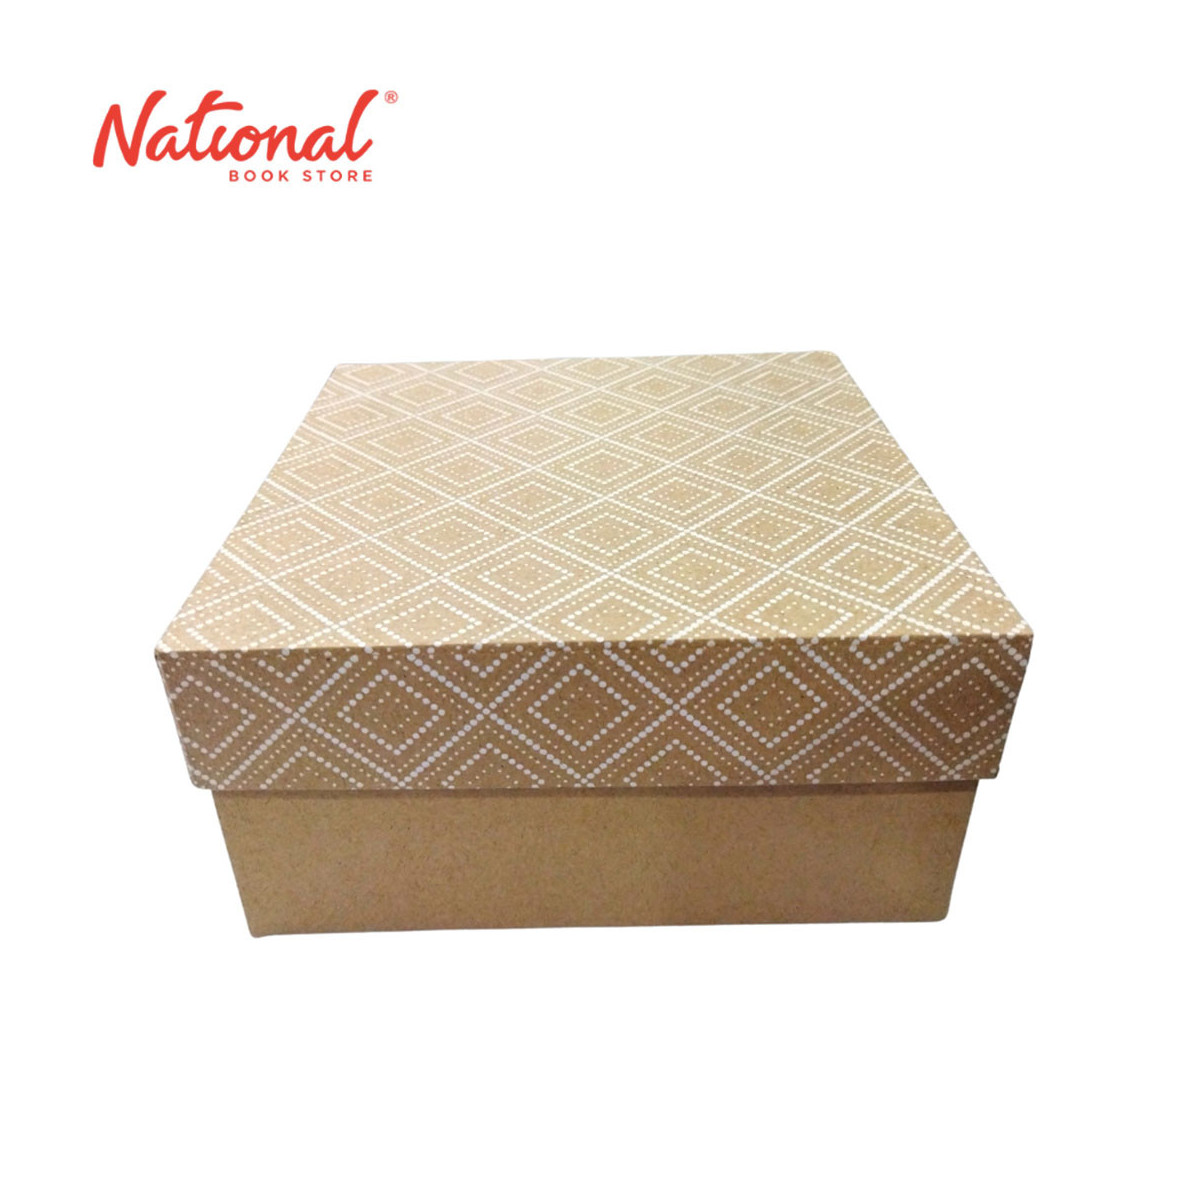 Printed Kraft Gift Box Square Large 16x16x8cm - Giftwrapping Supplies